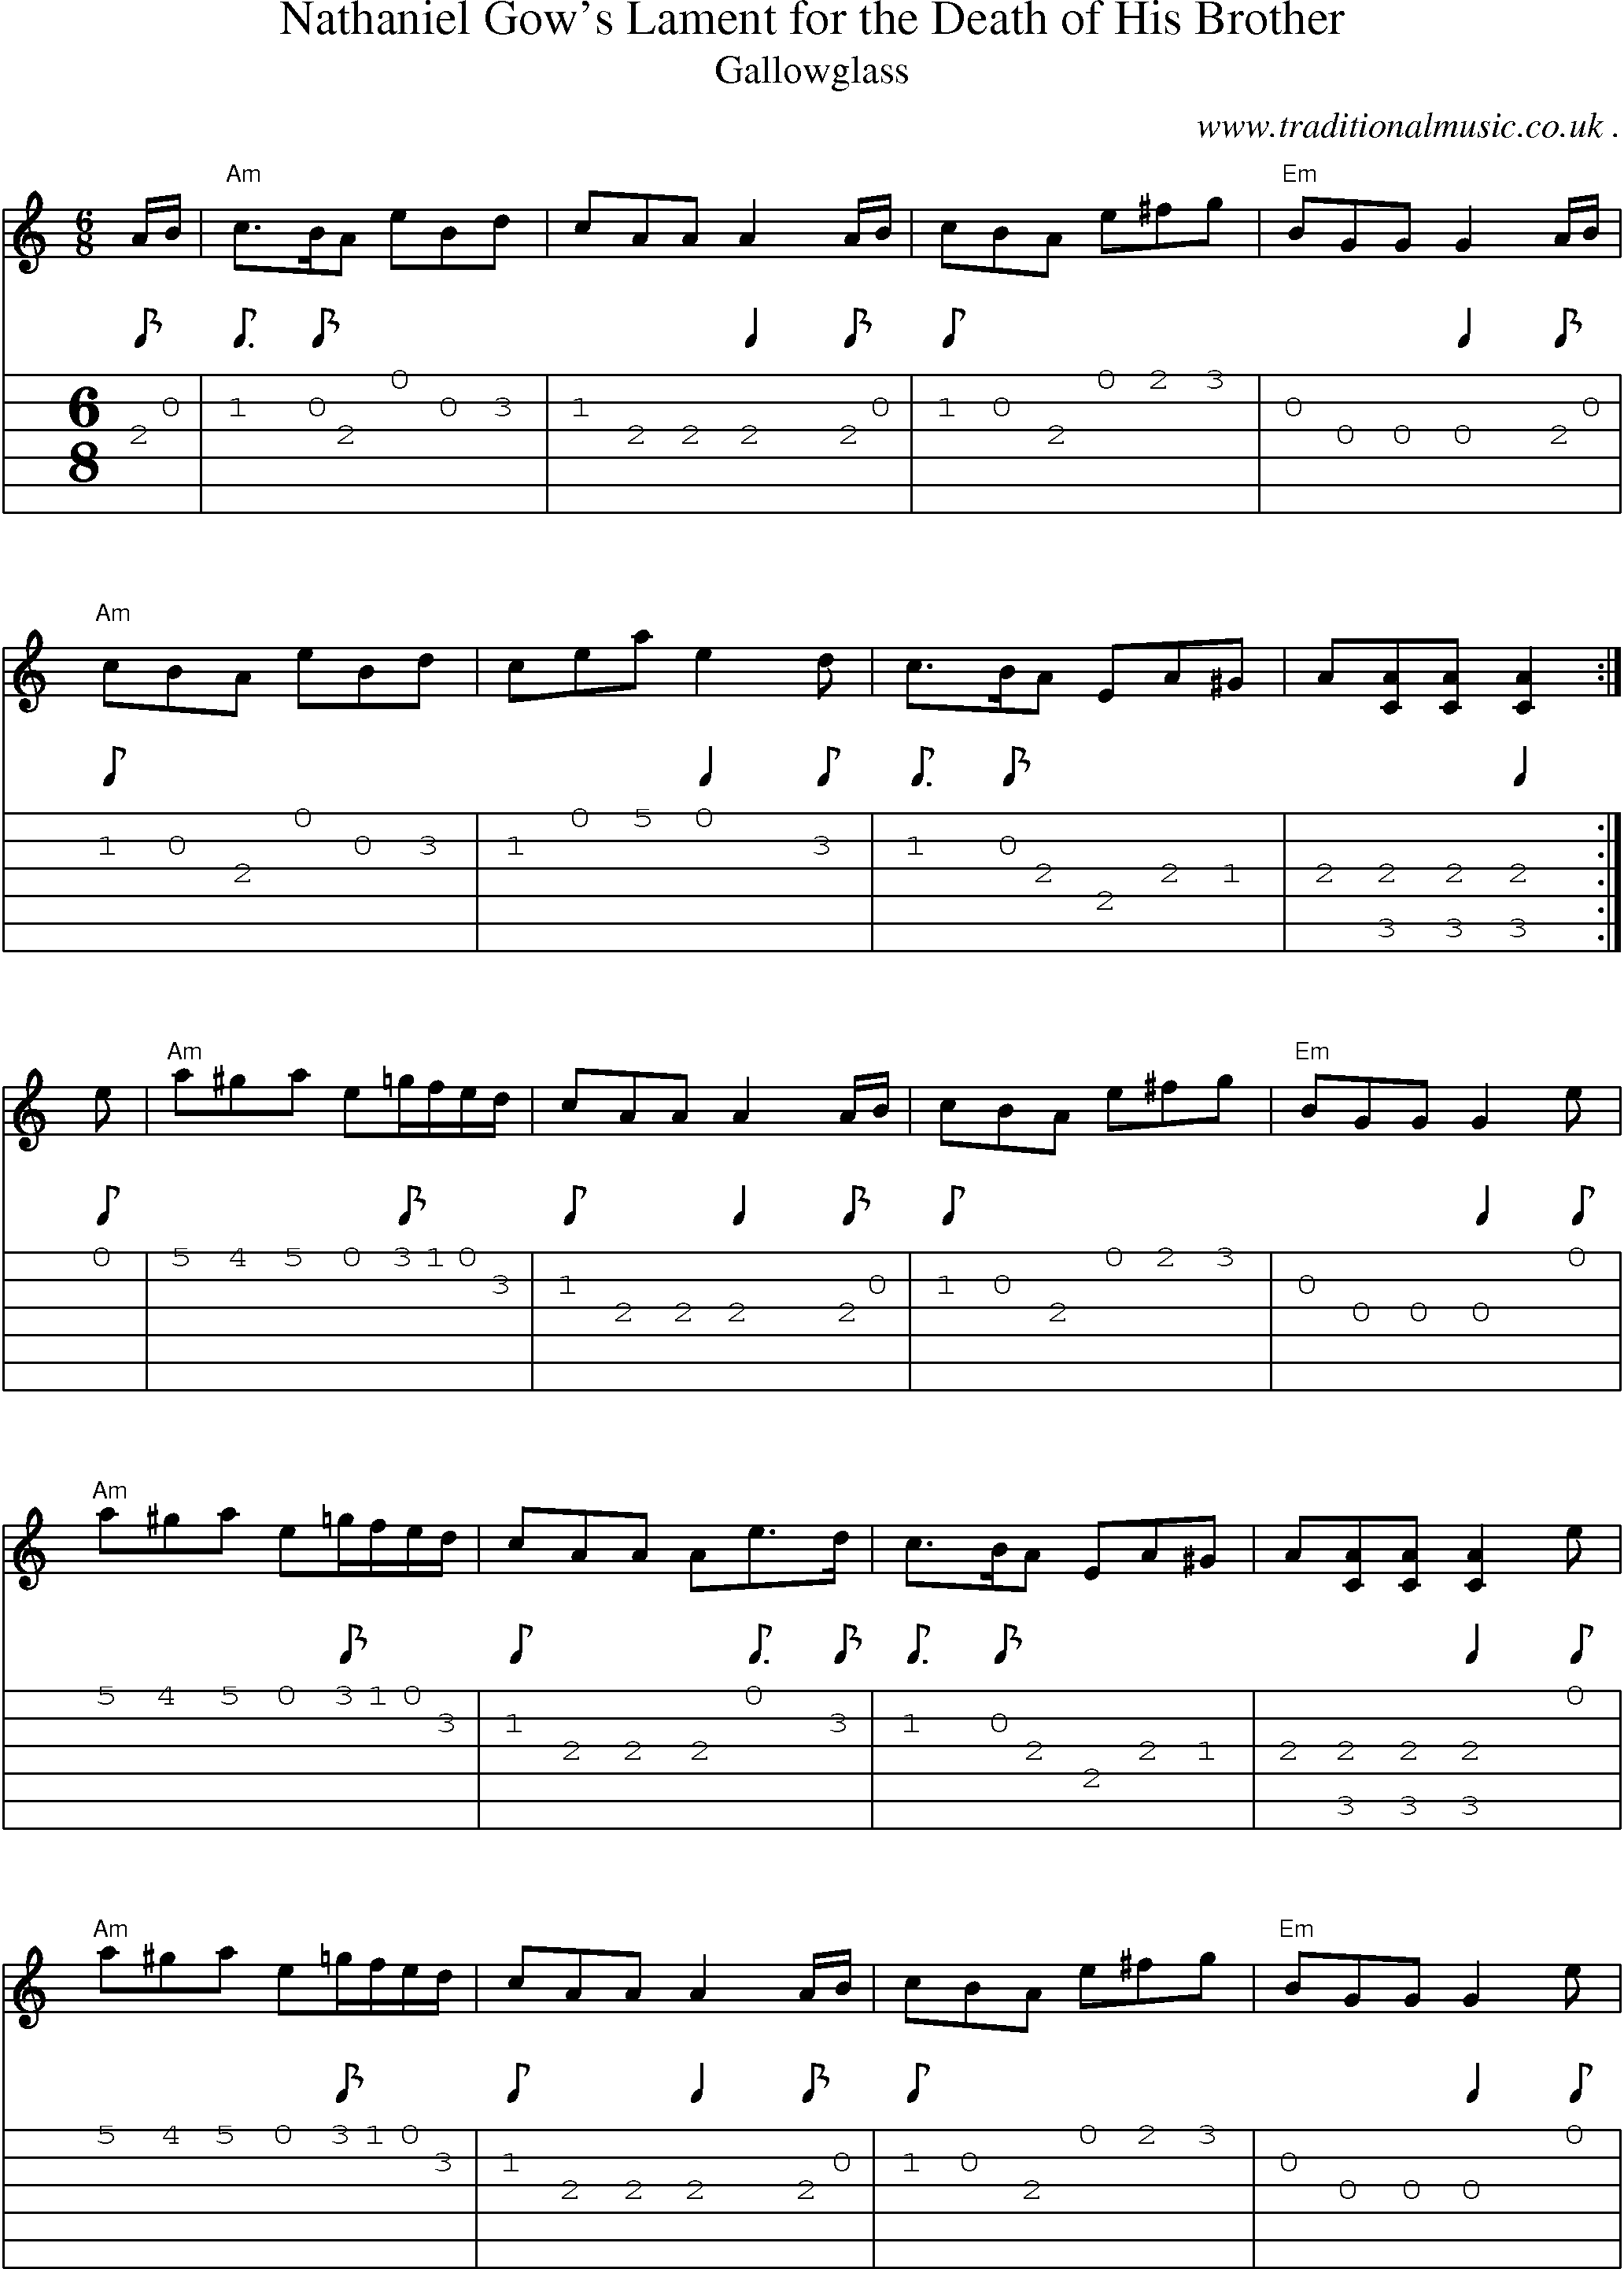 Music Score and Guitar Tabs for Nathaniel Gows Lament for the Death of His Brother